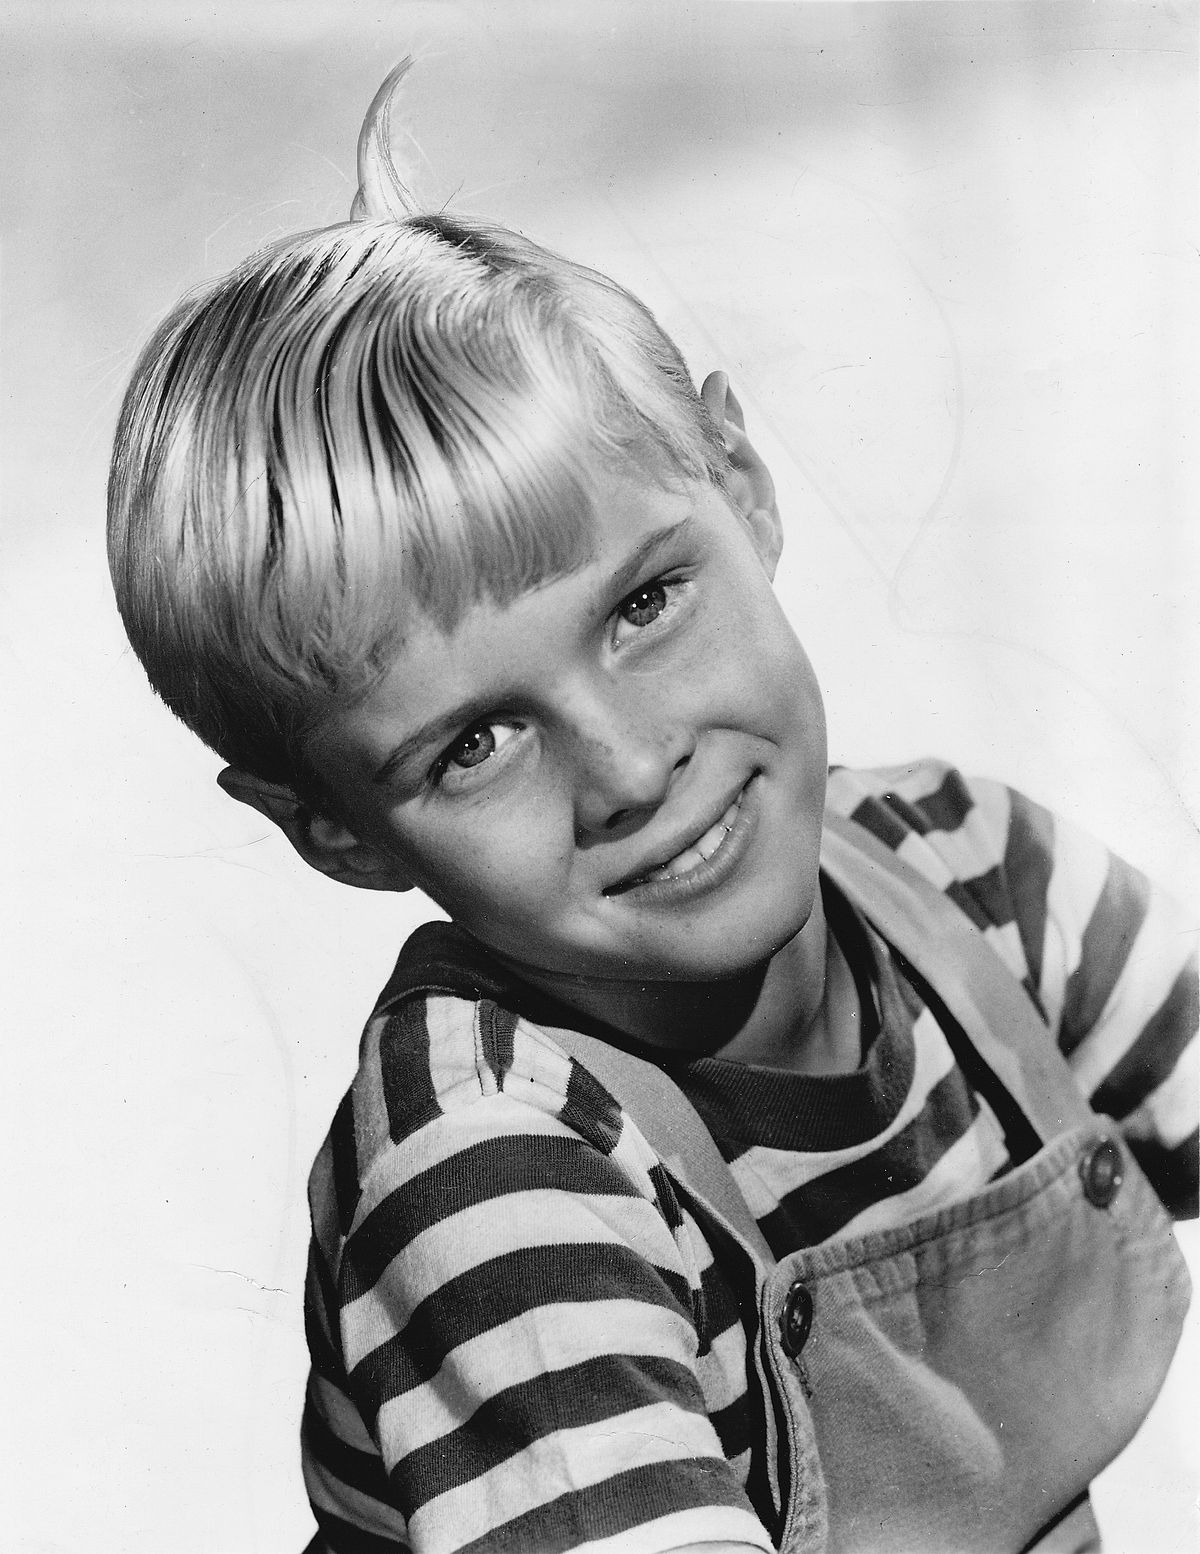 Dennis the Menace' star Jay North later worked as corrections officer, was  in the military - Washington Times